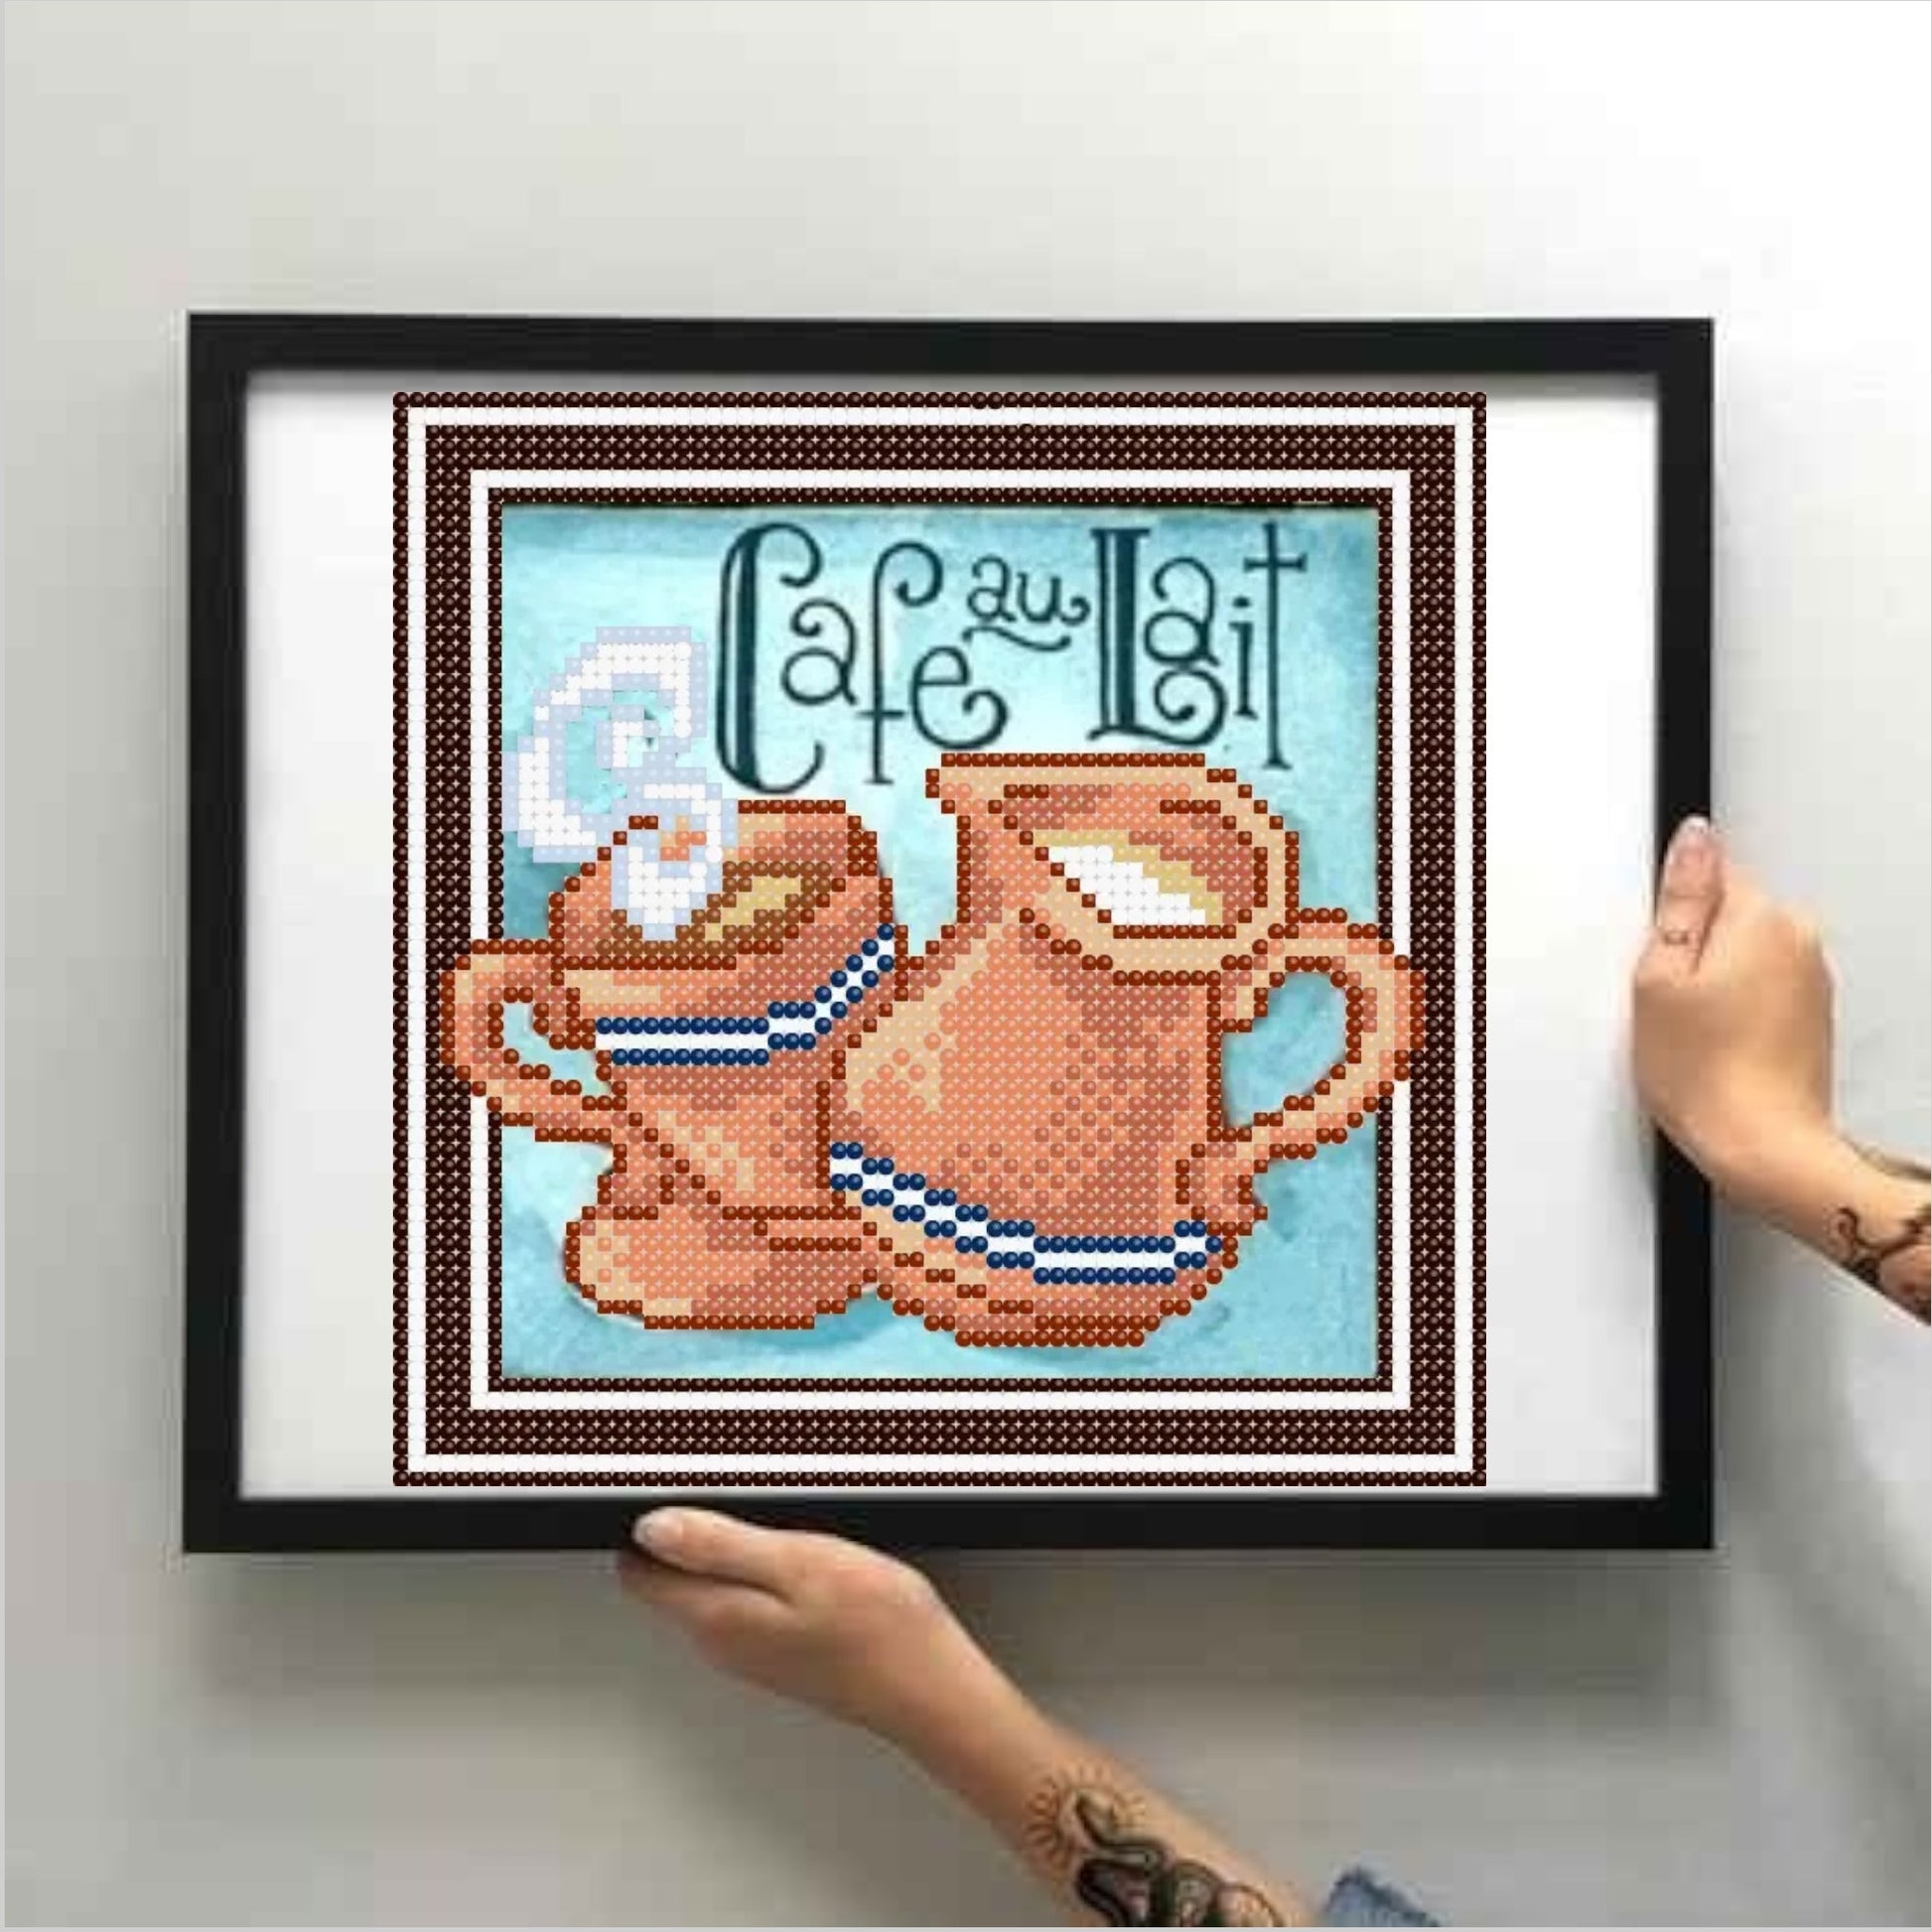 DIY Bead embroidery kit "Coffee with cream". Size: 6.3 - 6.3in (16 - 16cm). - VadymShop